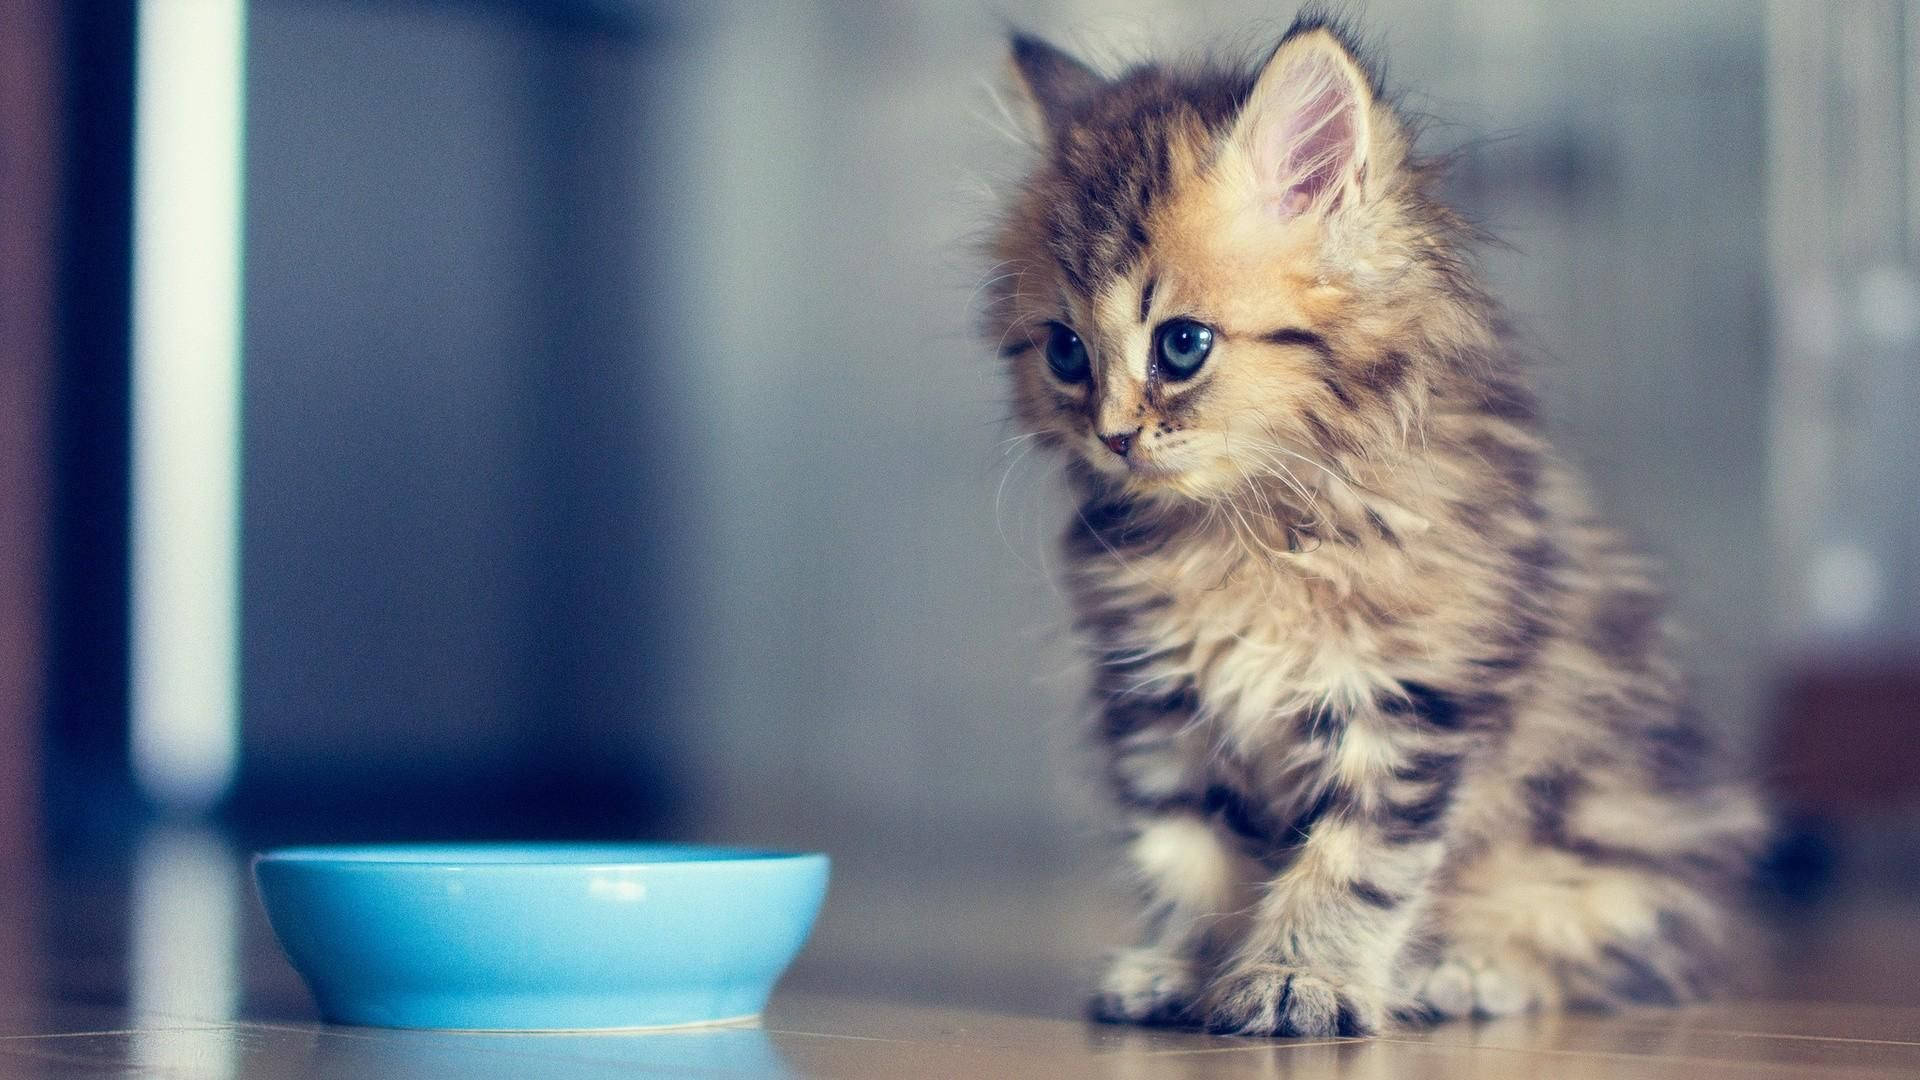 Kitten With Blue Bowl